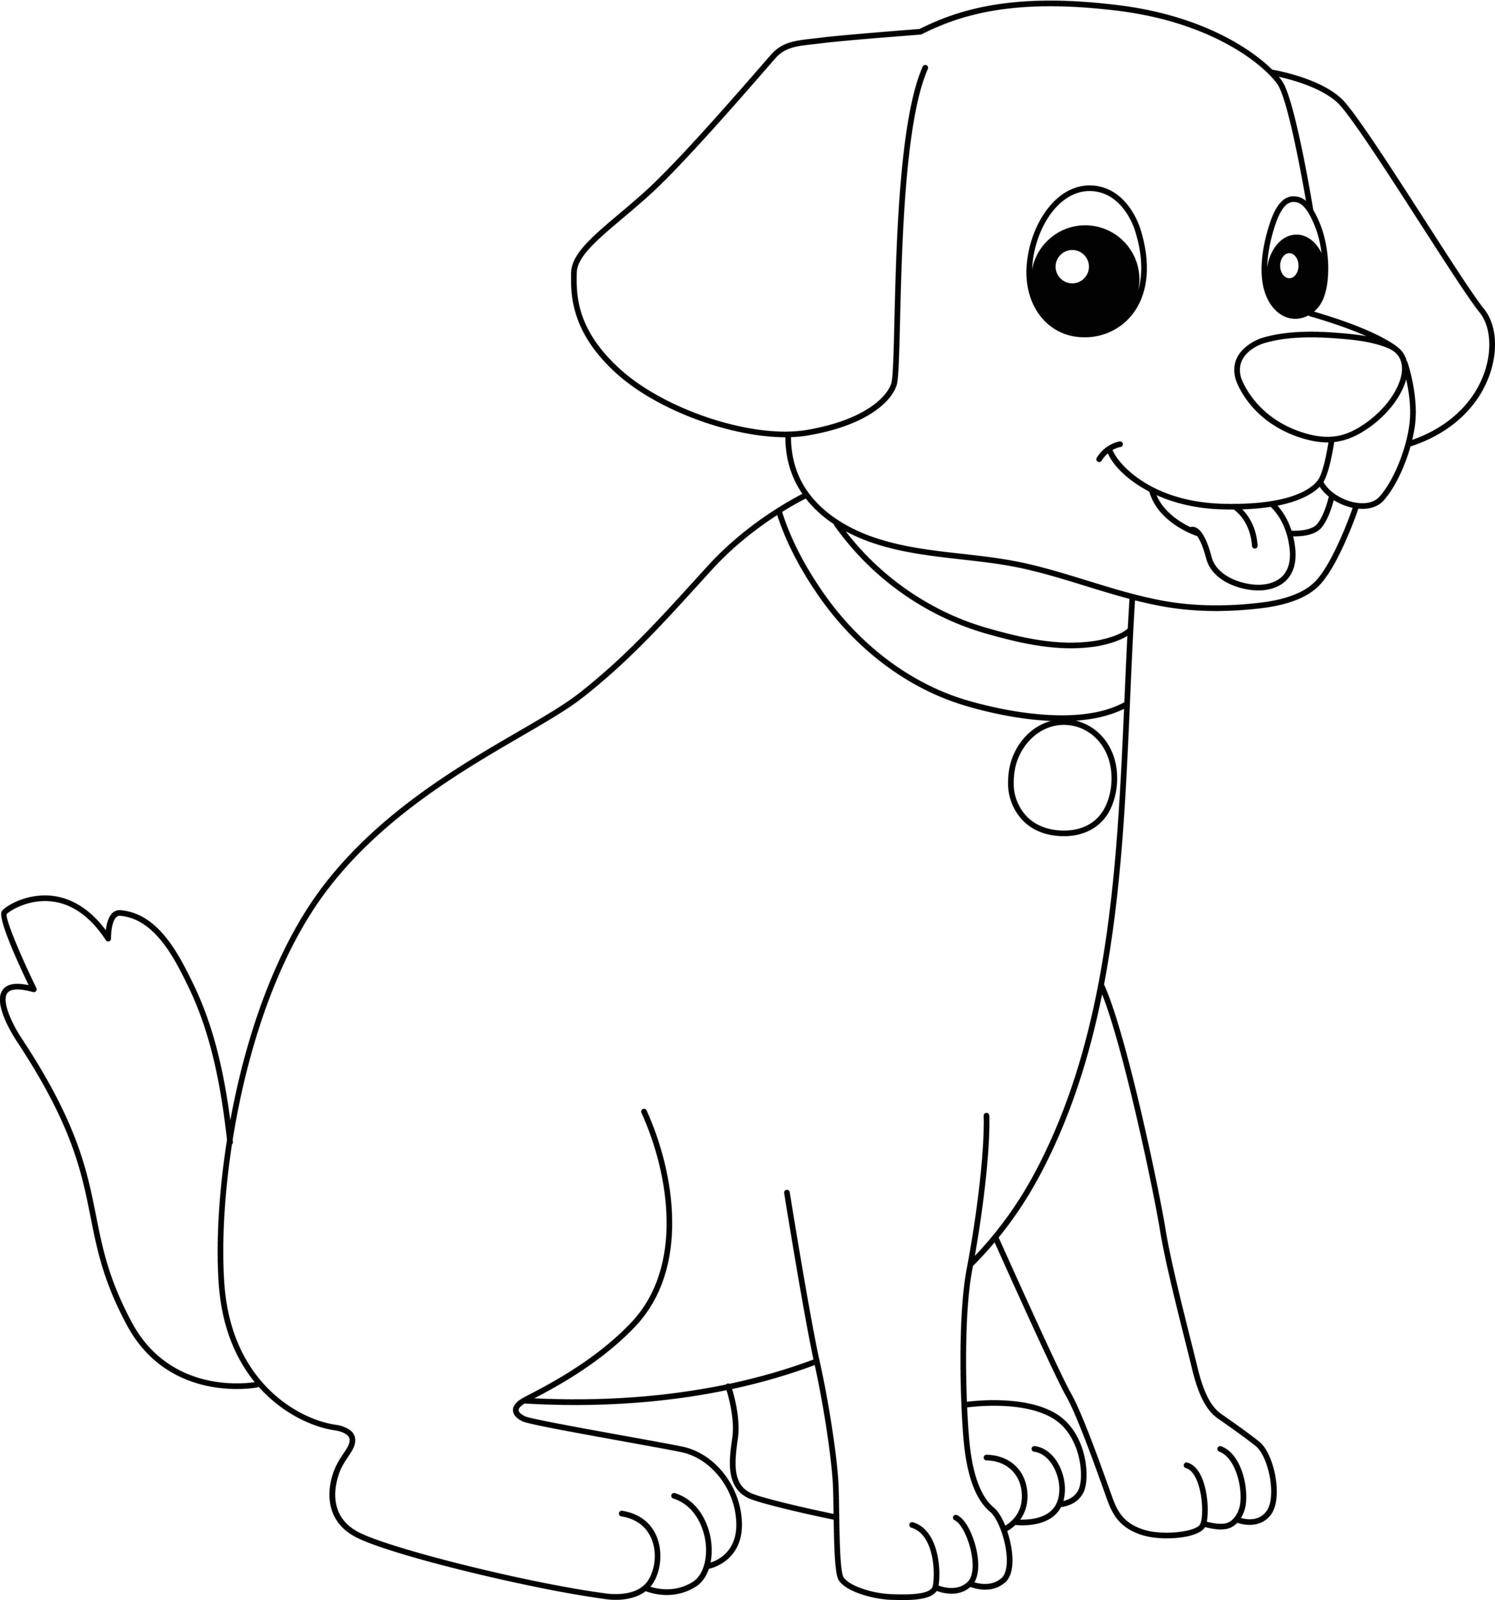 Dog Coloring Page Isolated for Kids by abbydesign